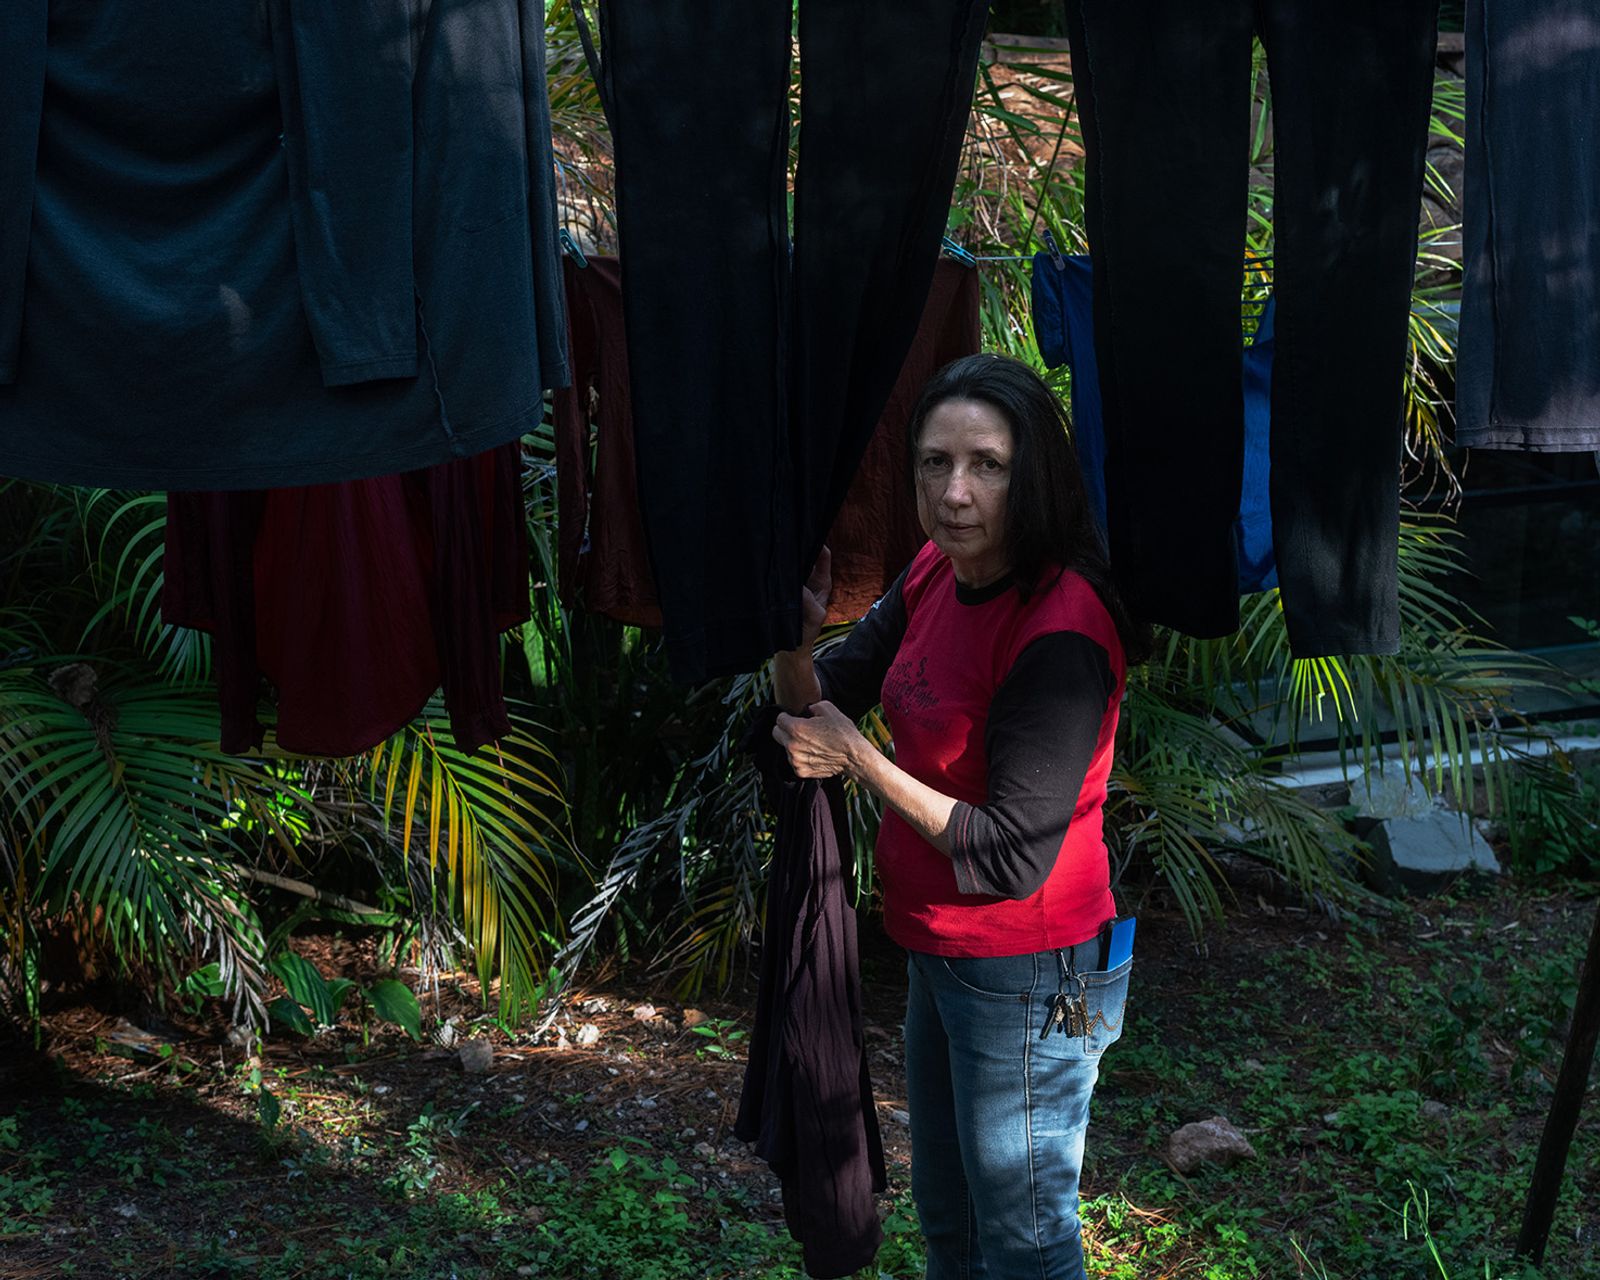 © Ariel Sosa - My mother hanging clothes to dry outside my family's home.